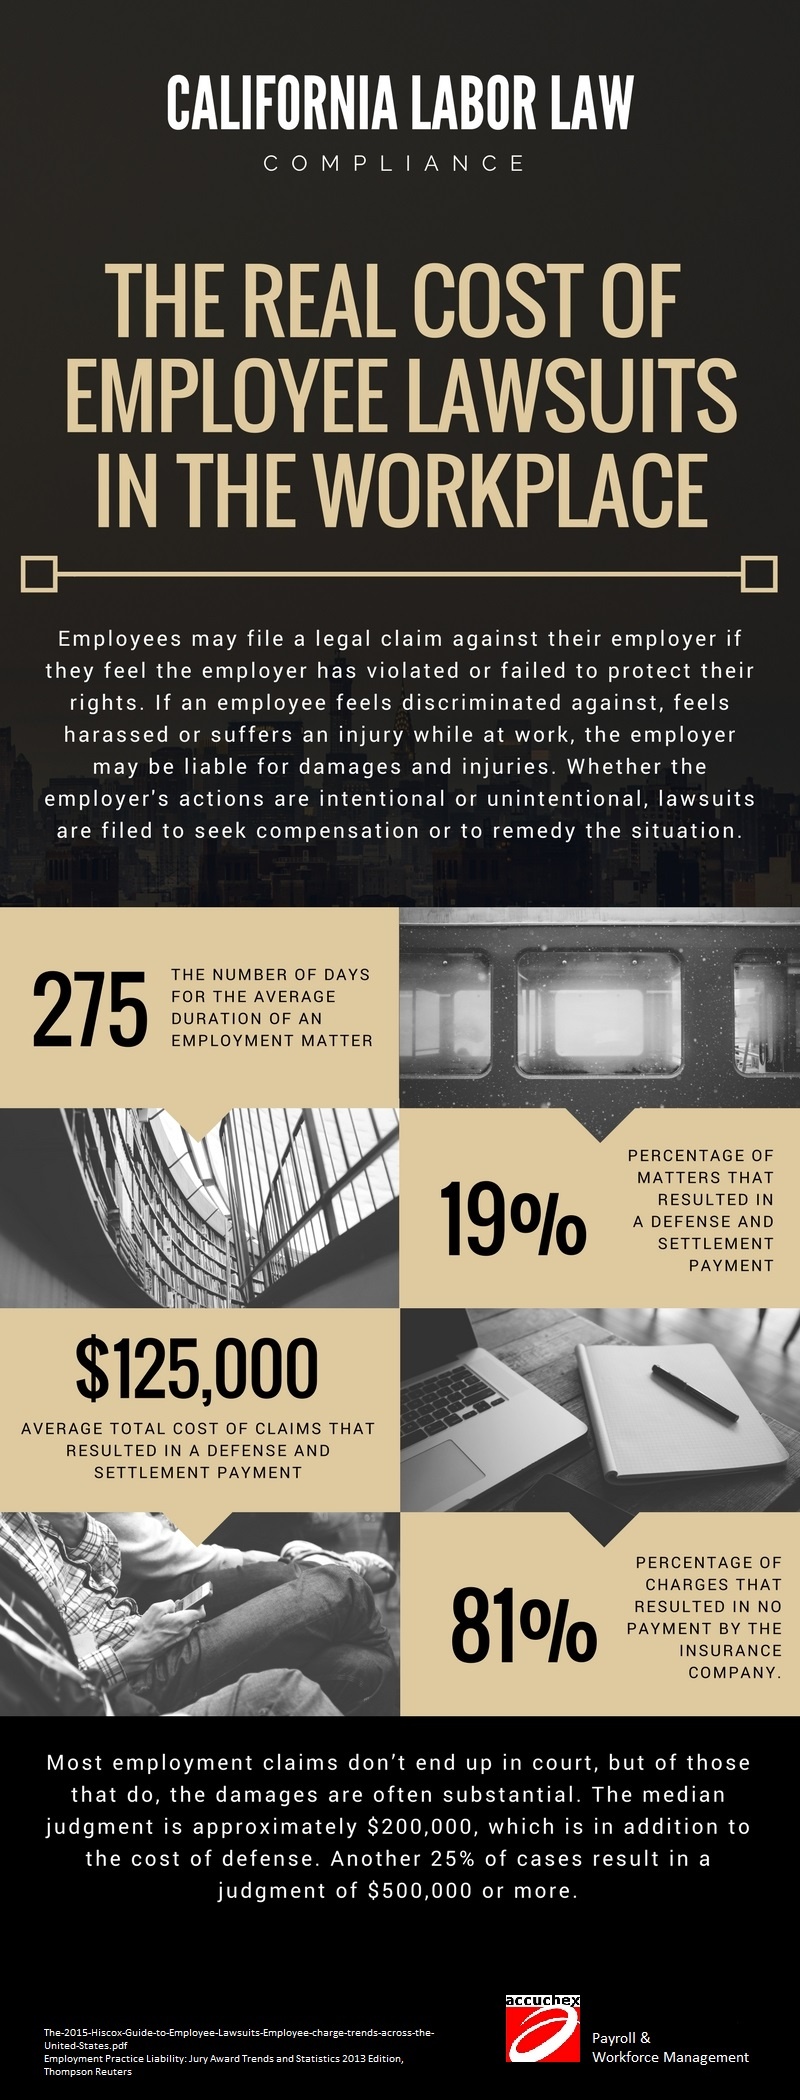 the-real-cost-of-employee-lawsuits-in-the-workplace-infographic